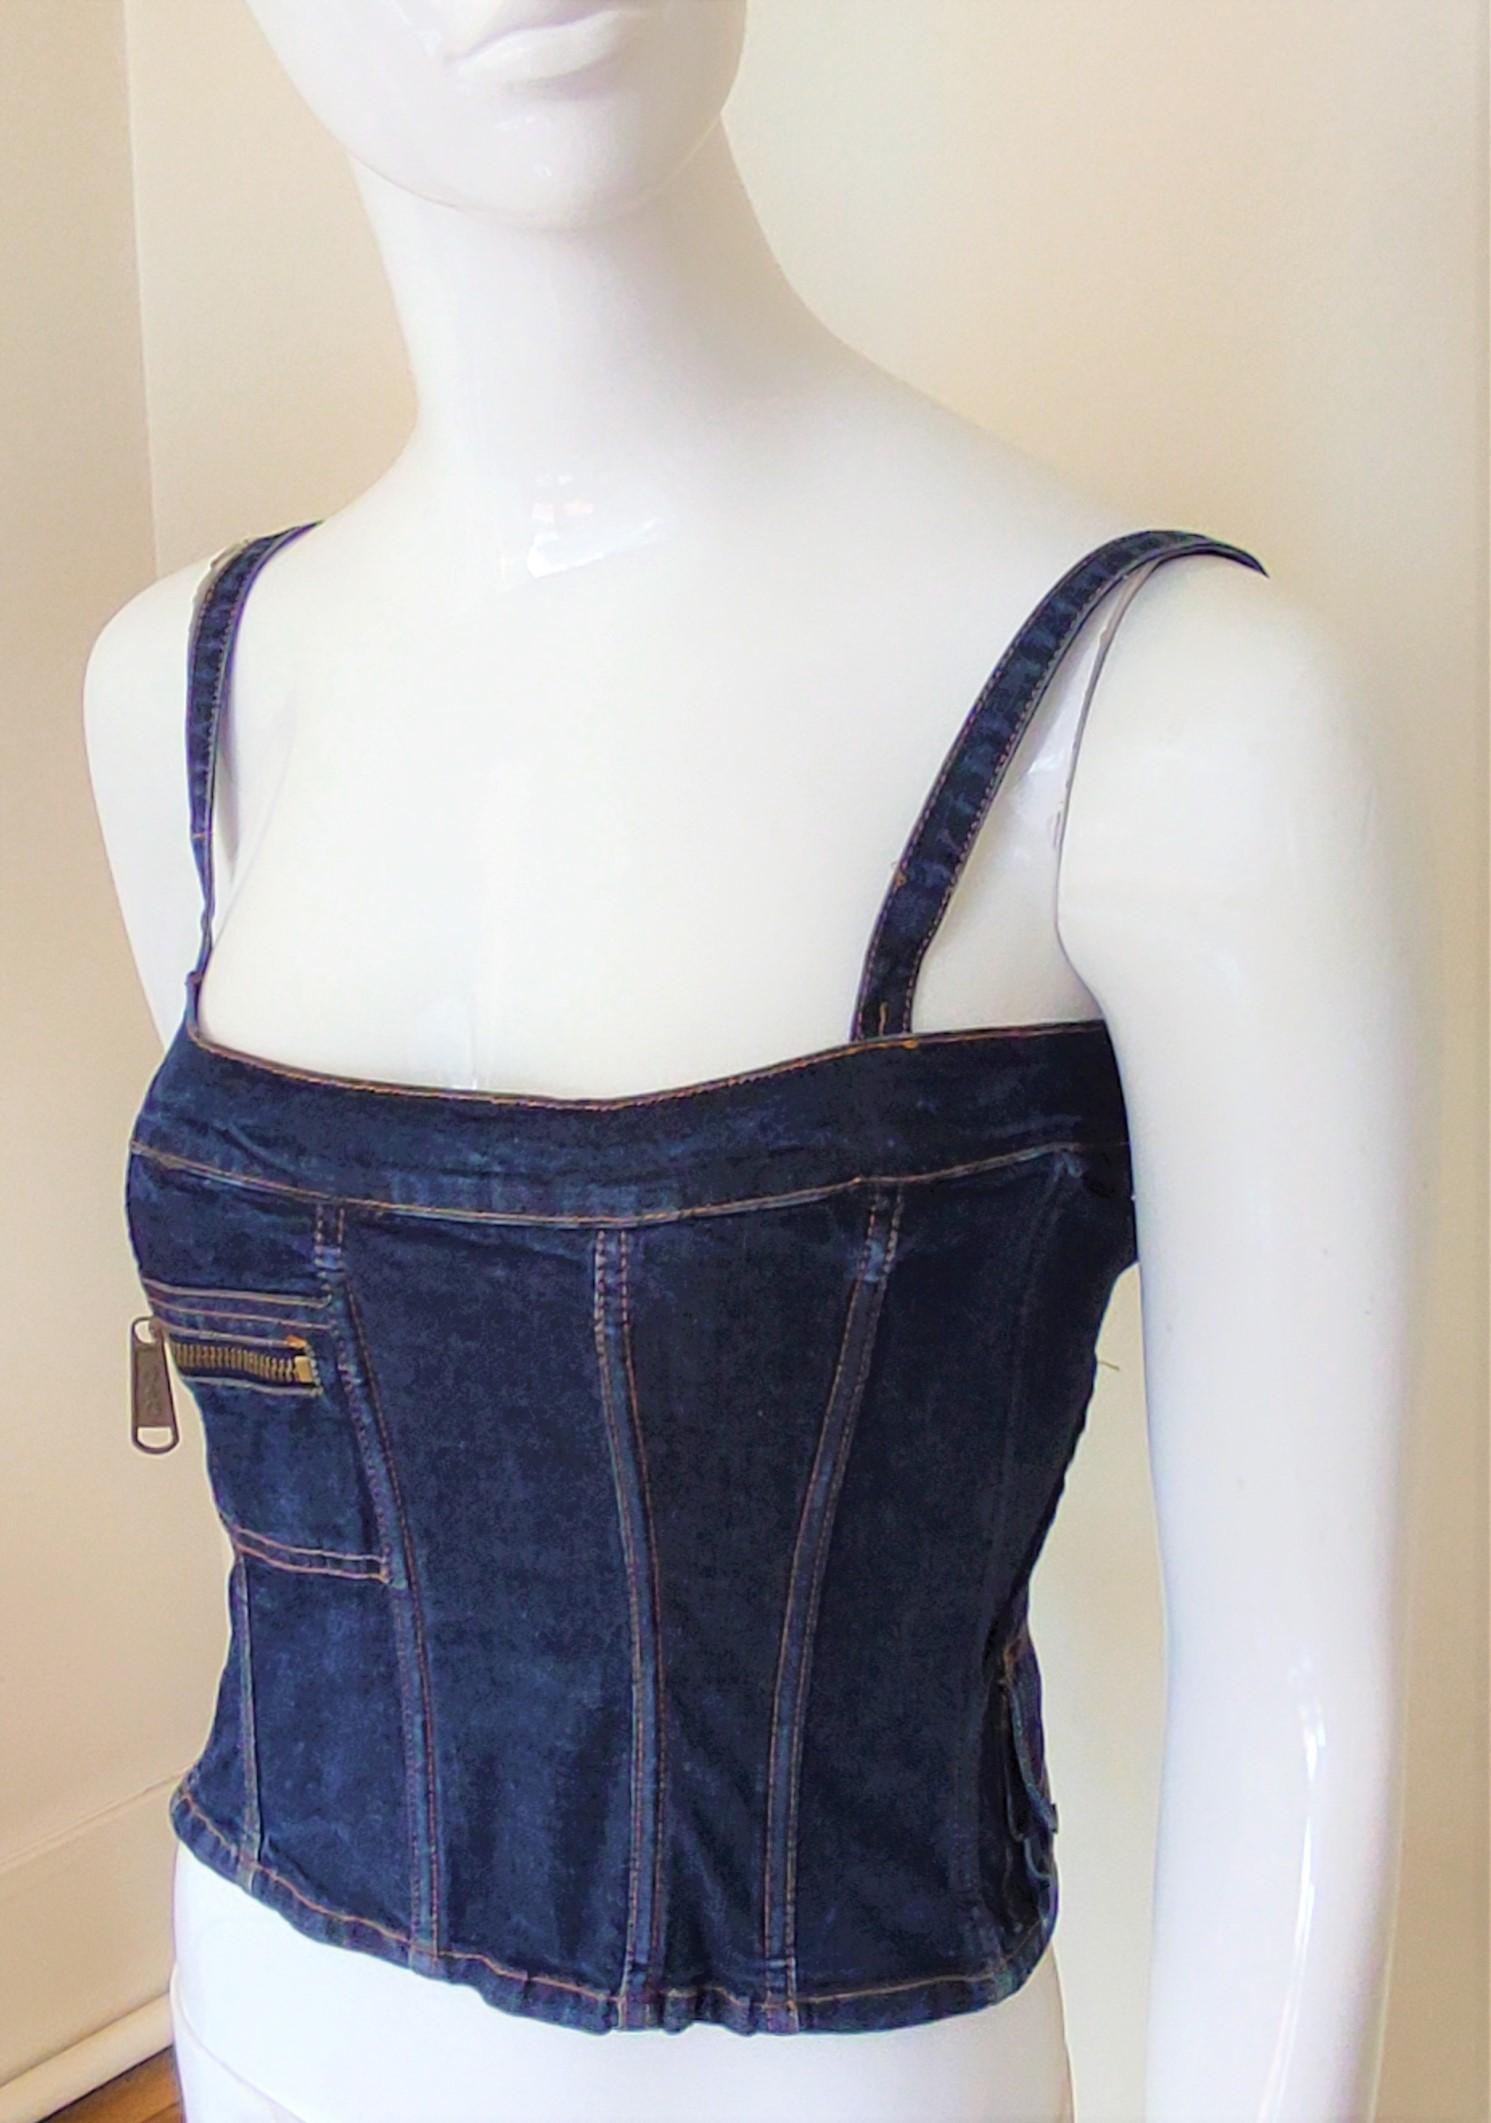 D&G Dolce and Gabbana Denim Bustier Military Vintage Small Cargo Top Corset For Sale 6